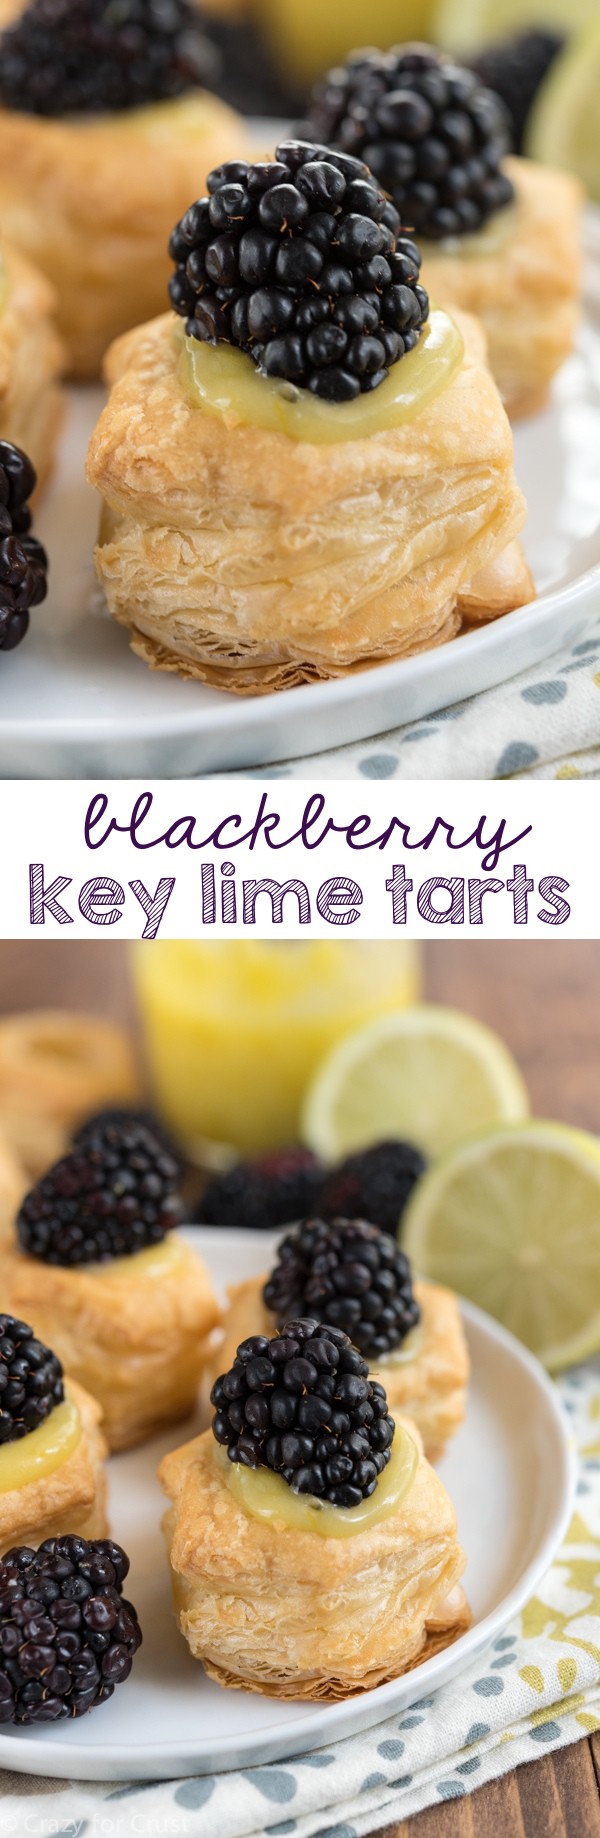 Blackberry Key Lime Tarts - an easy 3 ingredient recipe that's perfect for a party!